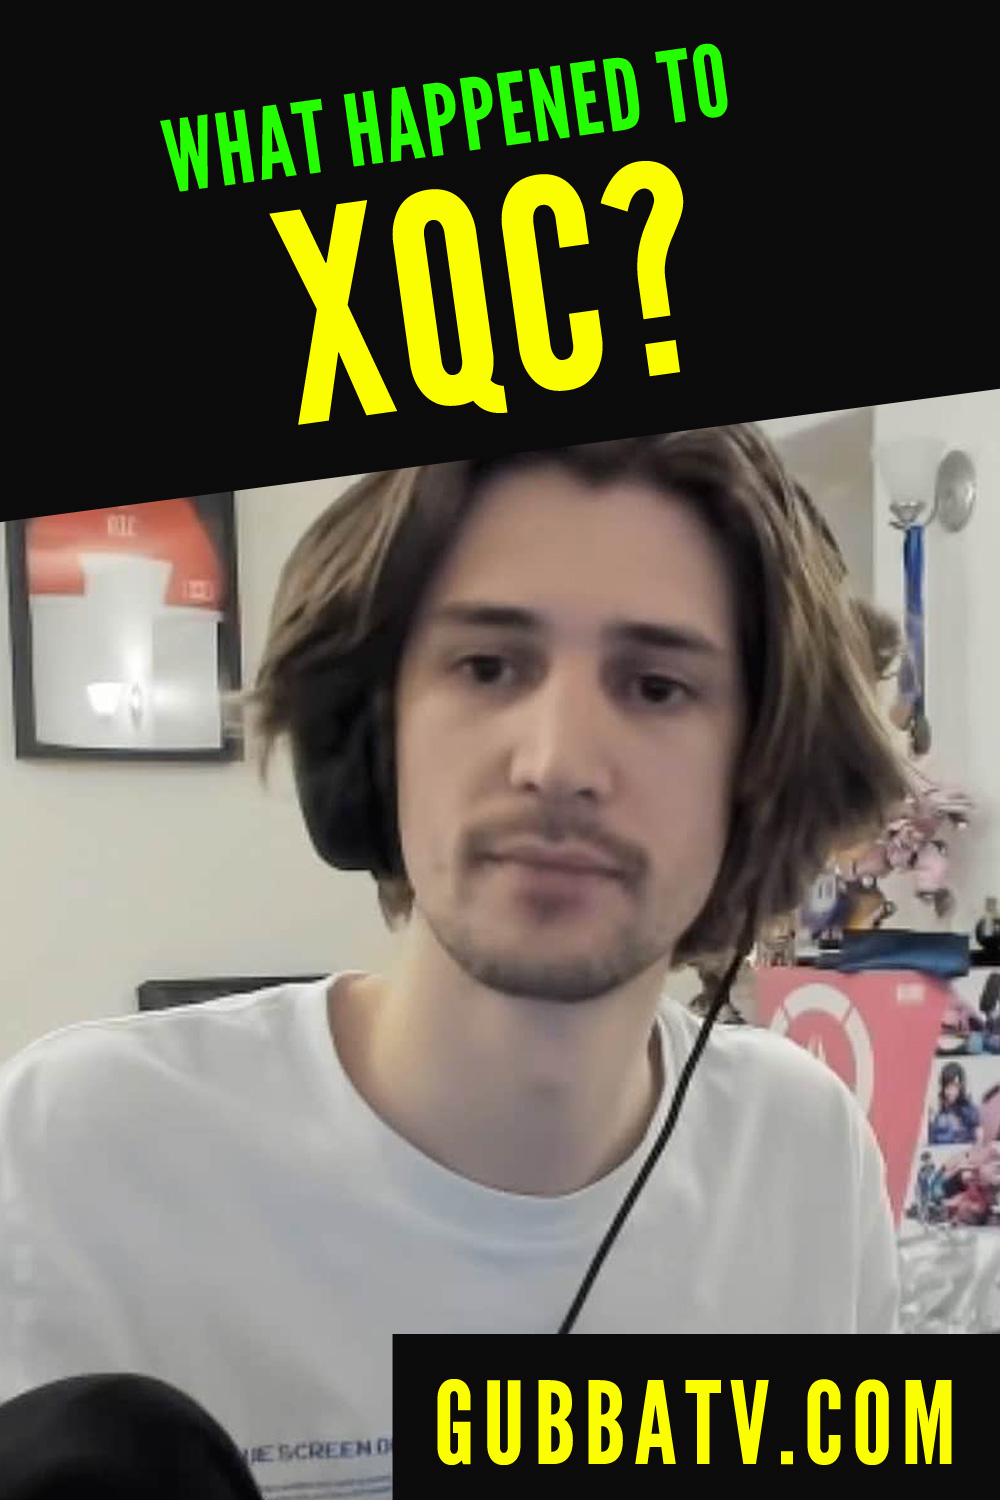 What Happened To xQc